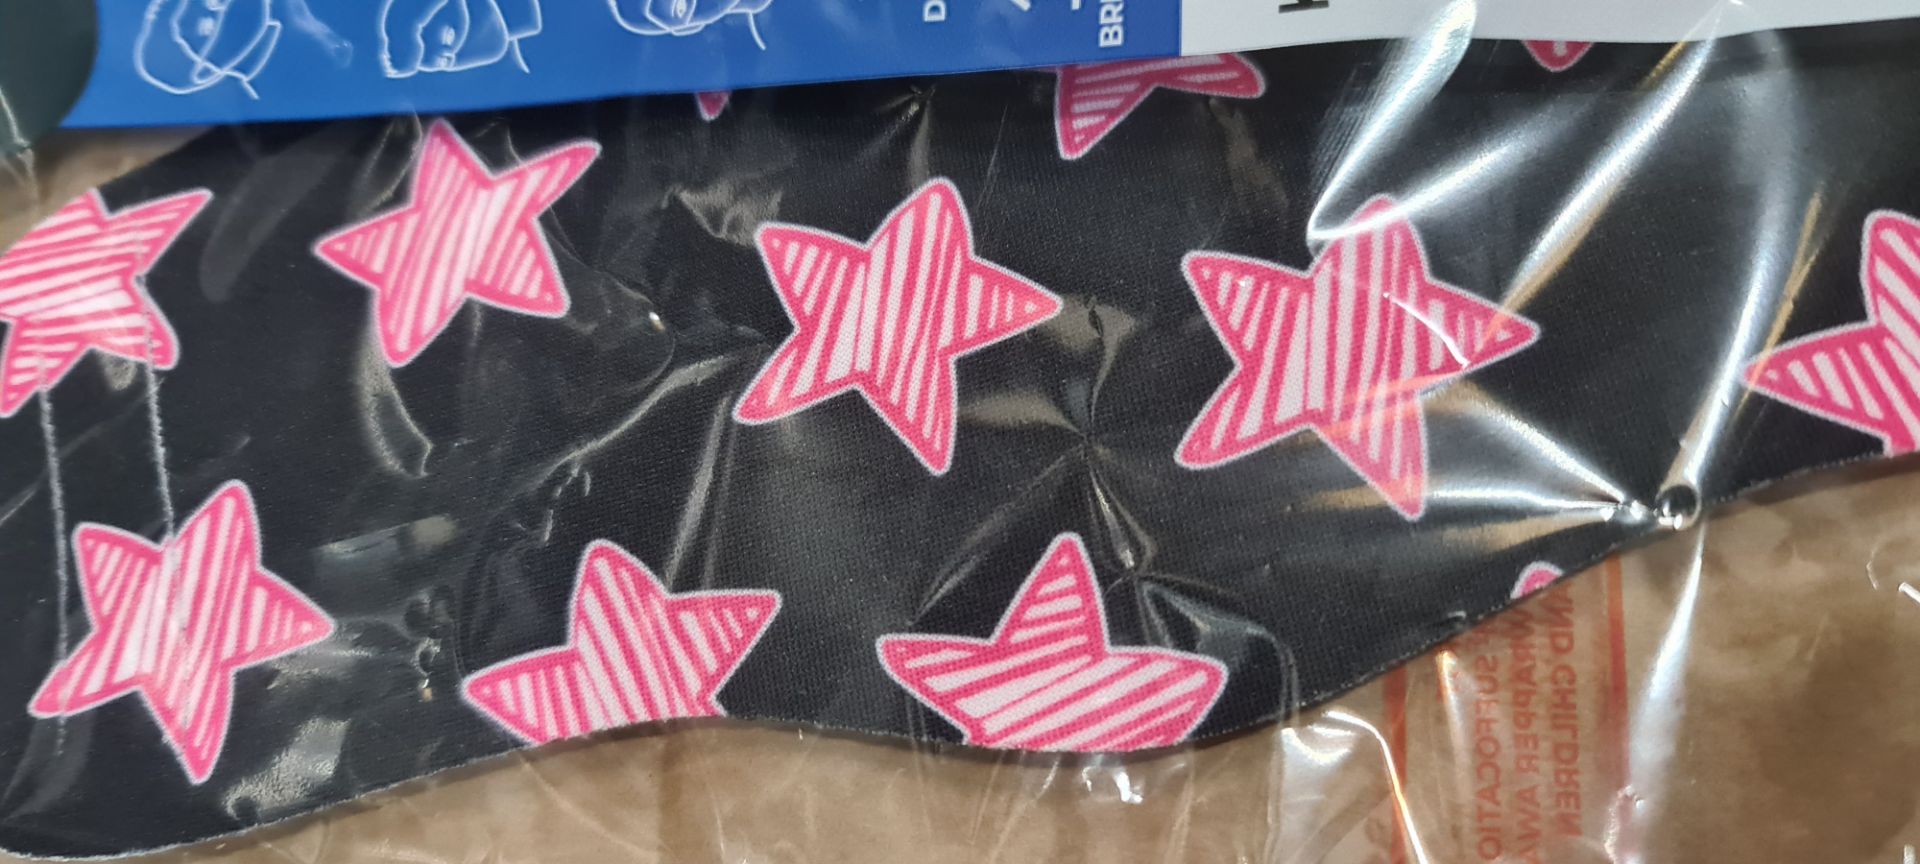 100 off kid's masks, individually packaged, in black with pink stars - Image 2 of 7